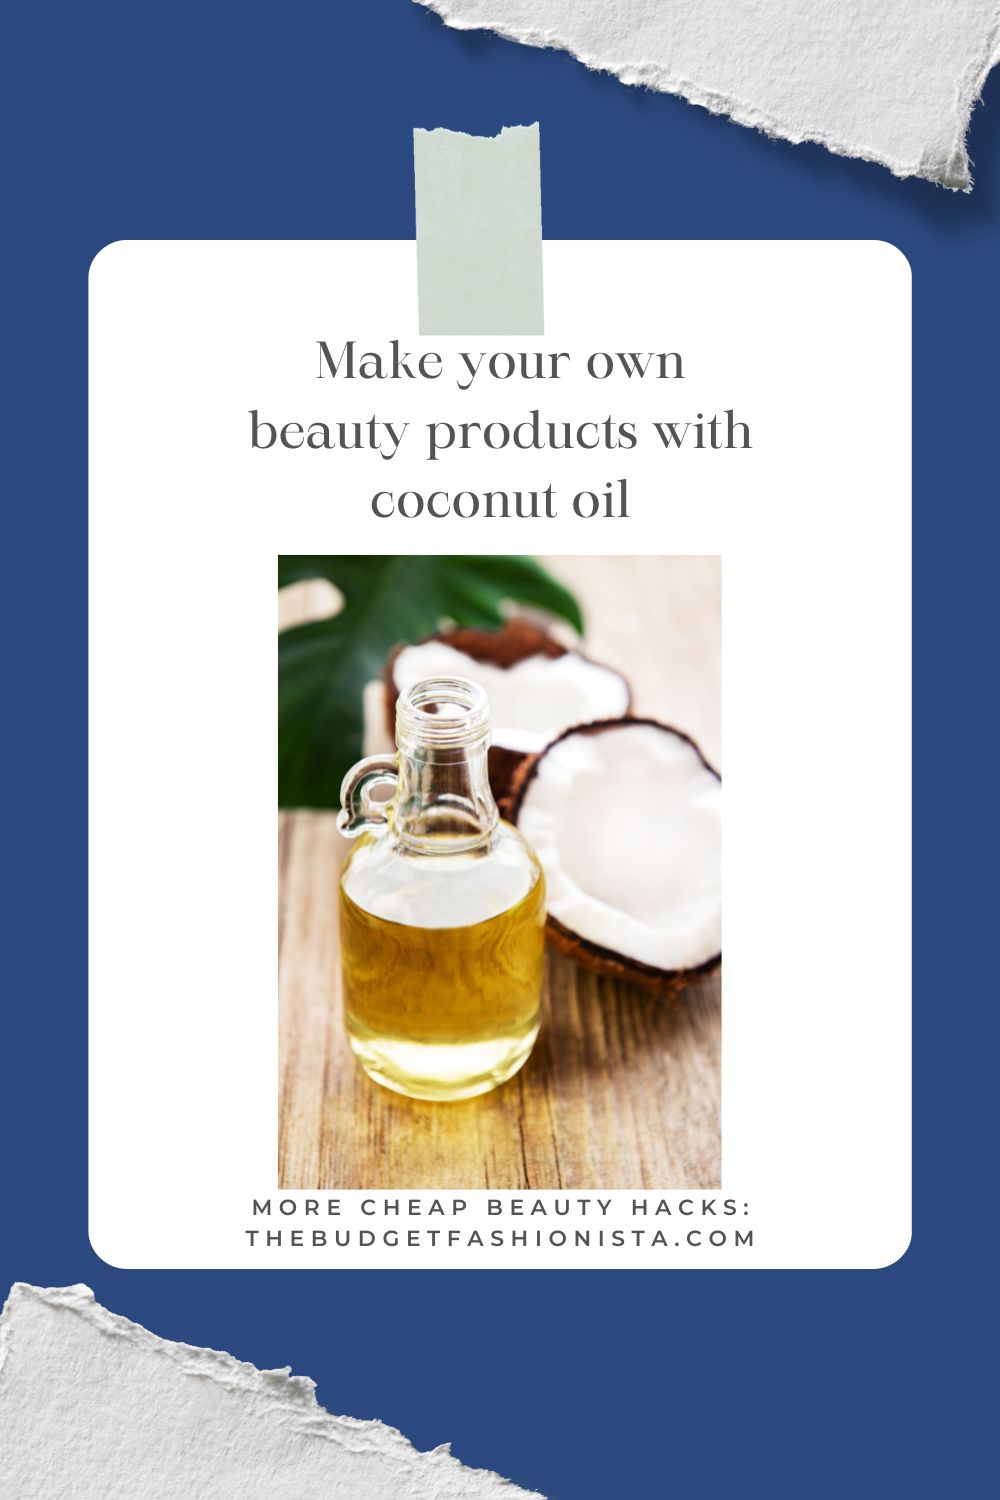 Image of coconut oil as a cheap beauty hack bottle with text overlay.